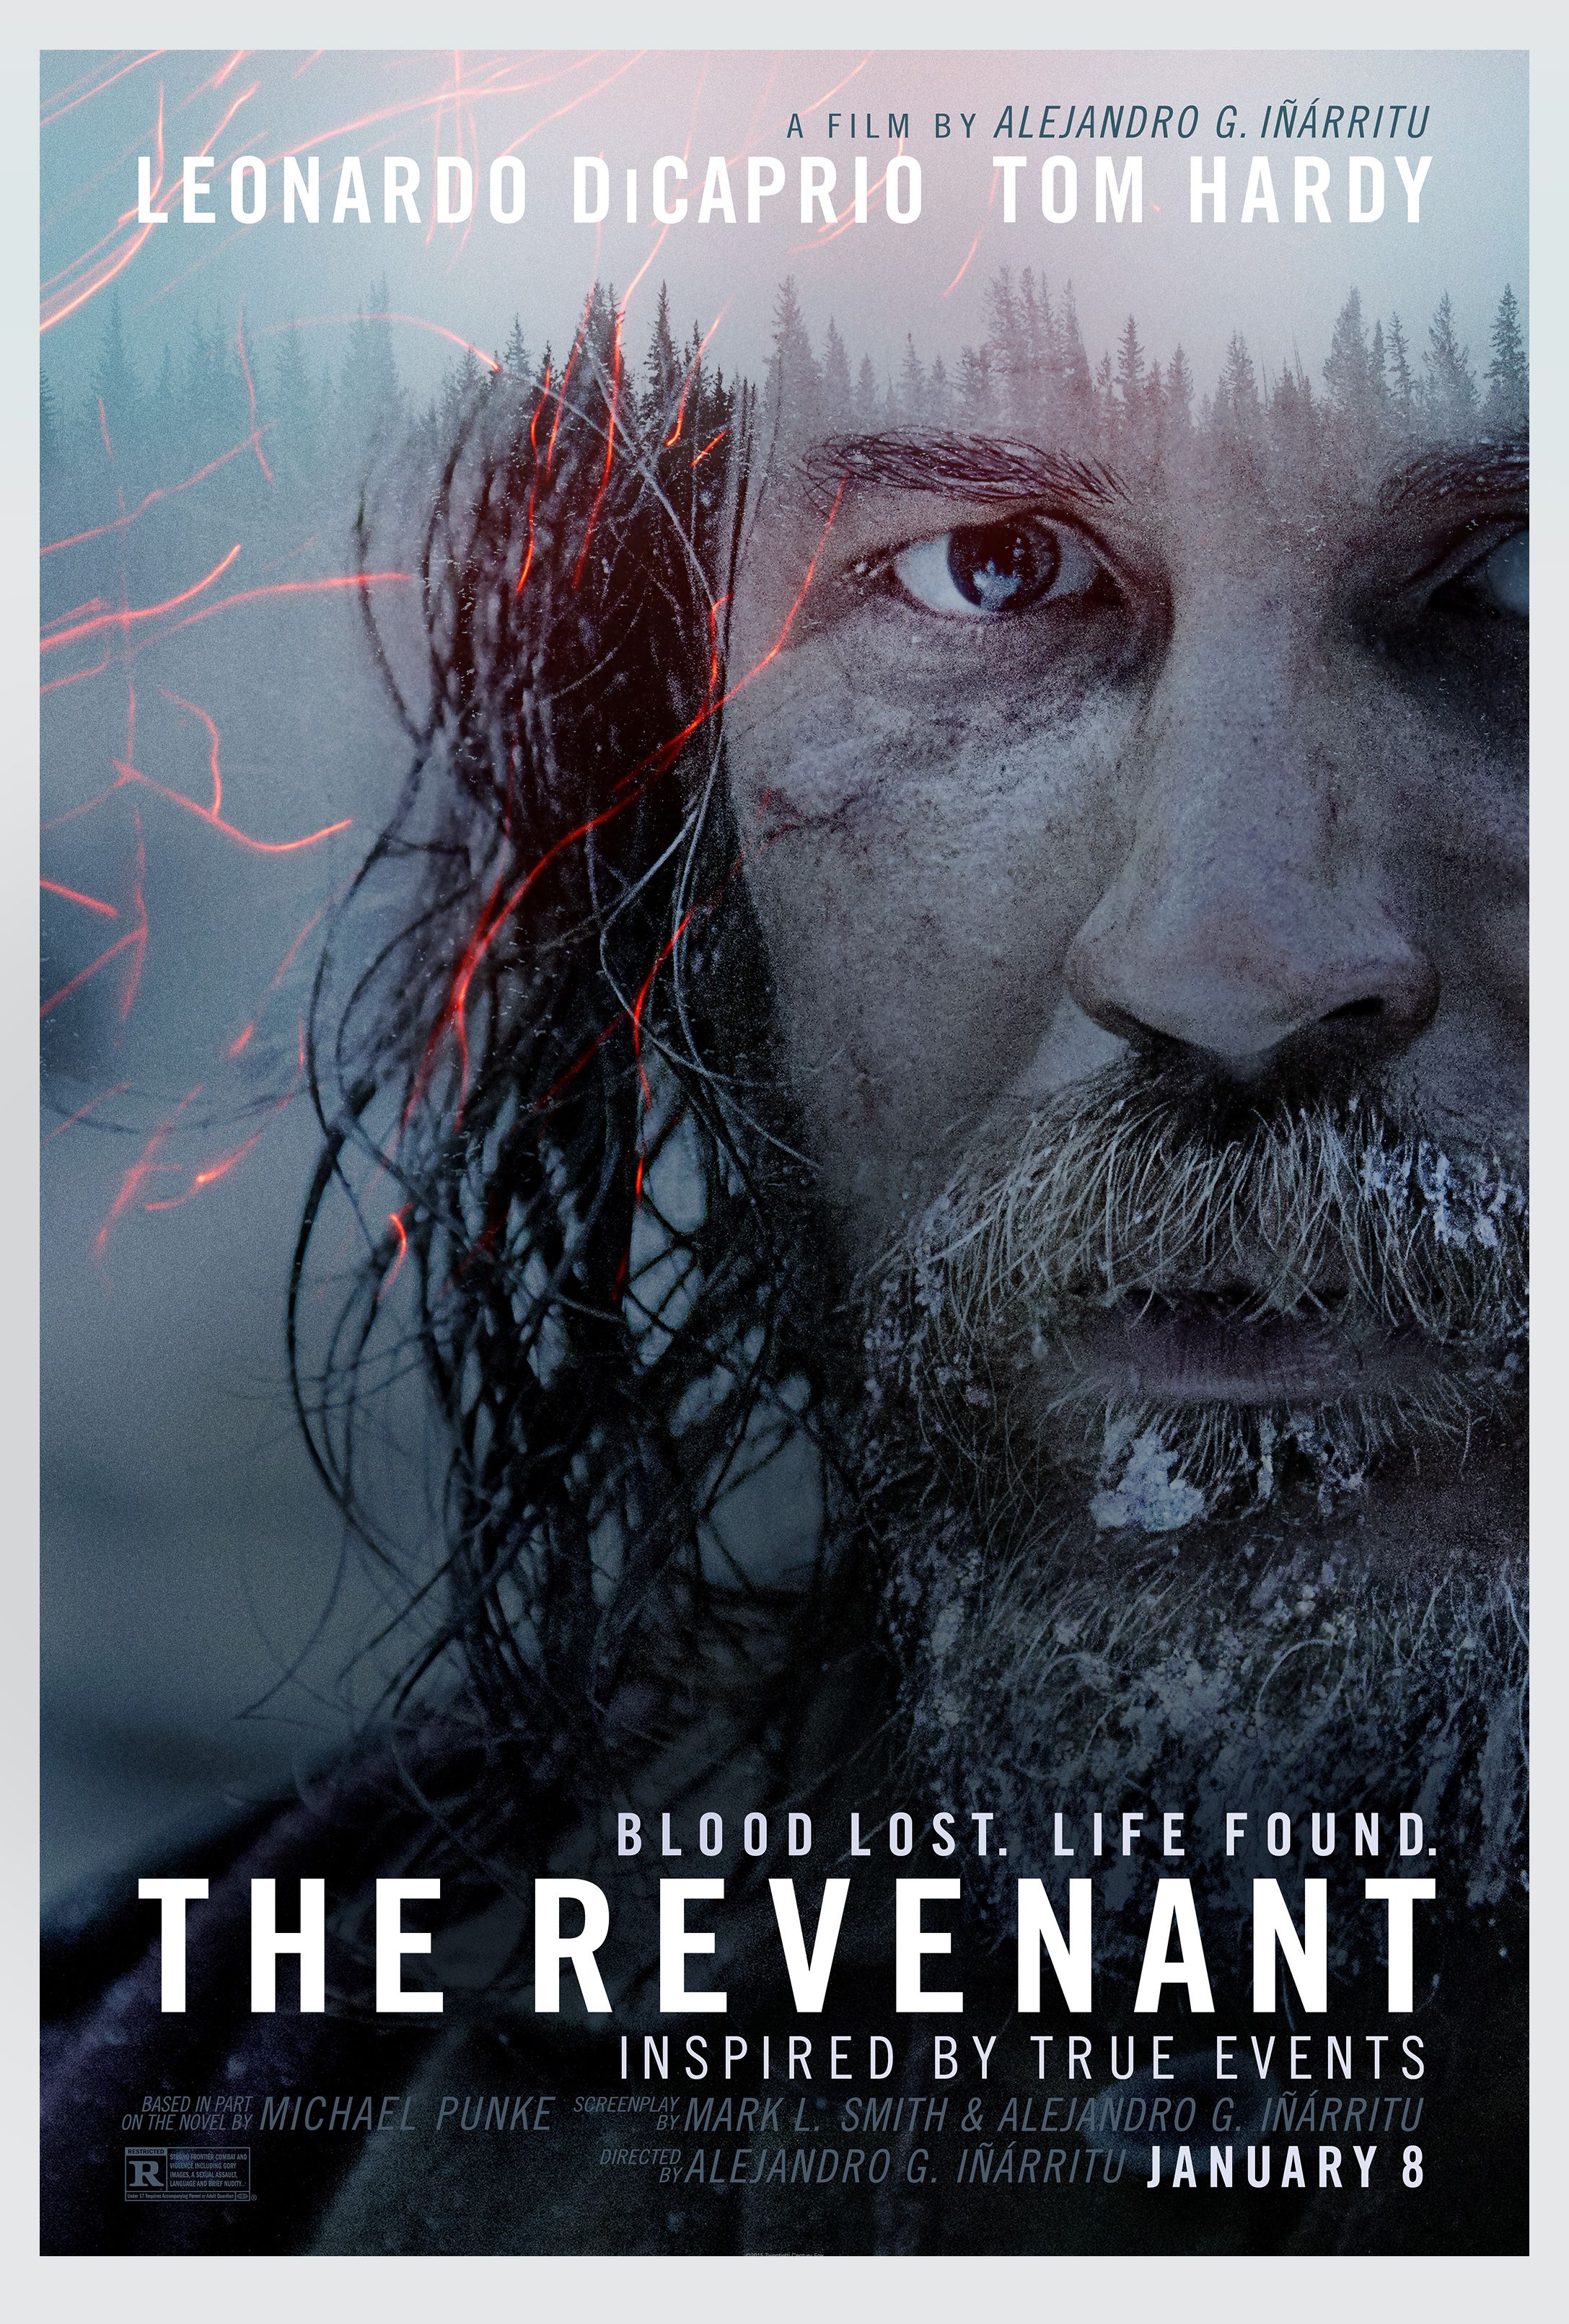 Revenant Posters Feature Leonardo DiCaprio and Tom Hardy | Collider